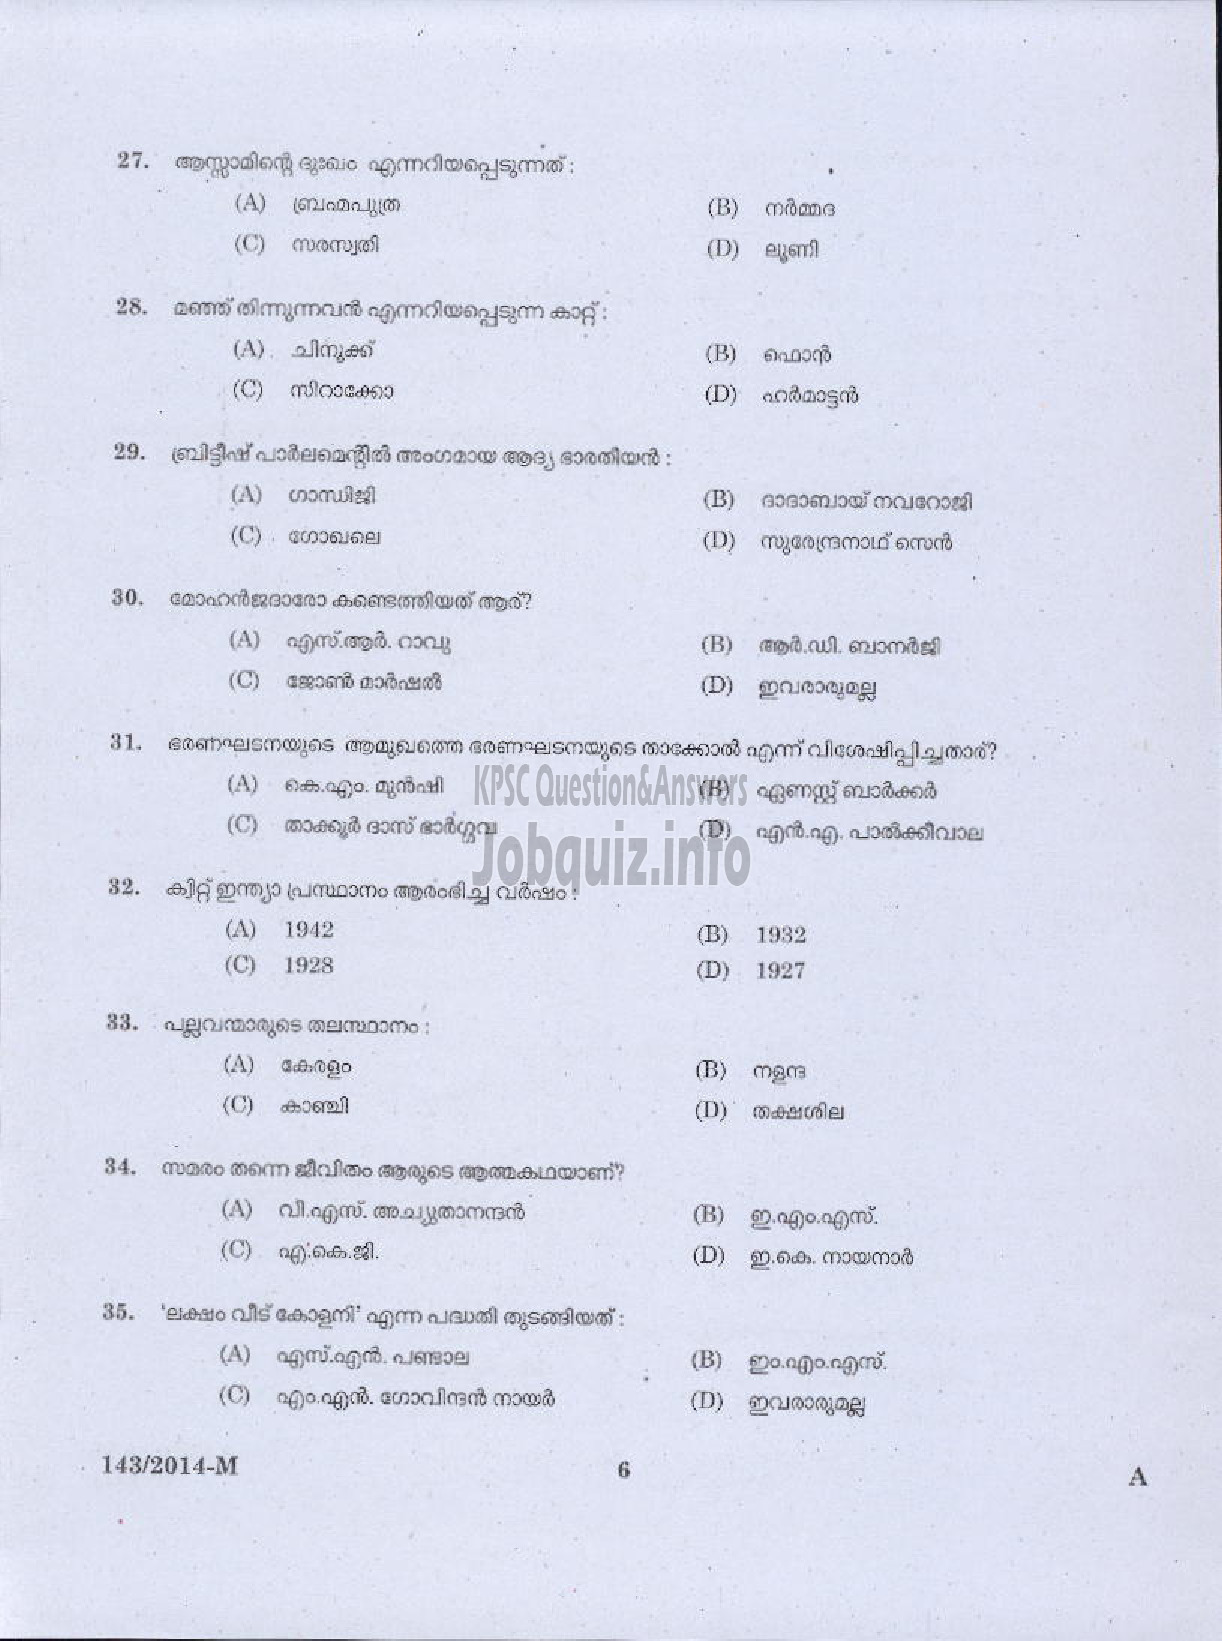 Kerala PSC Question Paper - WOMEN POLICE CONSTABLE APB POLICE MALE WARDER JAIL TSR AND KNR UNIT ( Malayalam ) -4